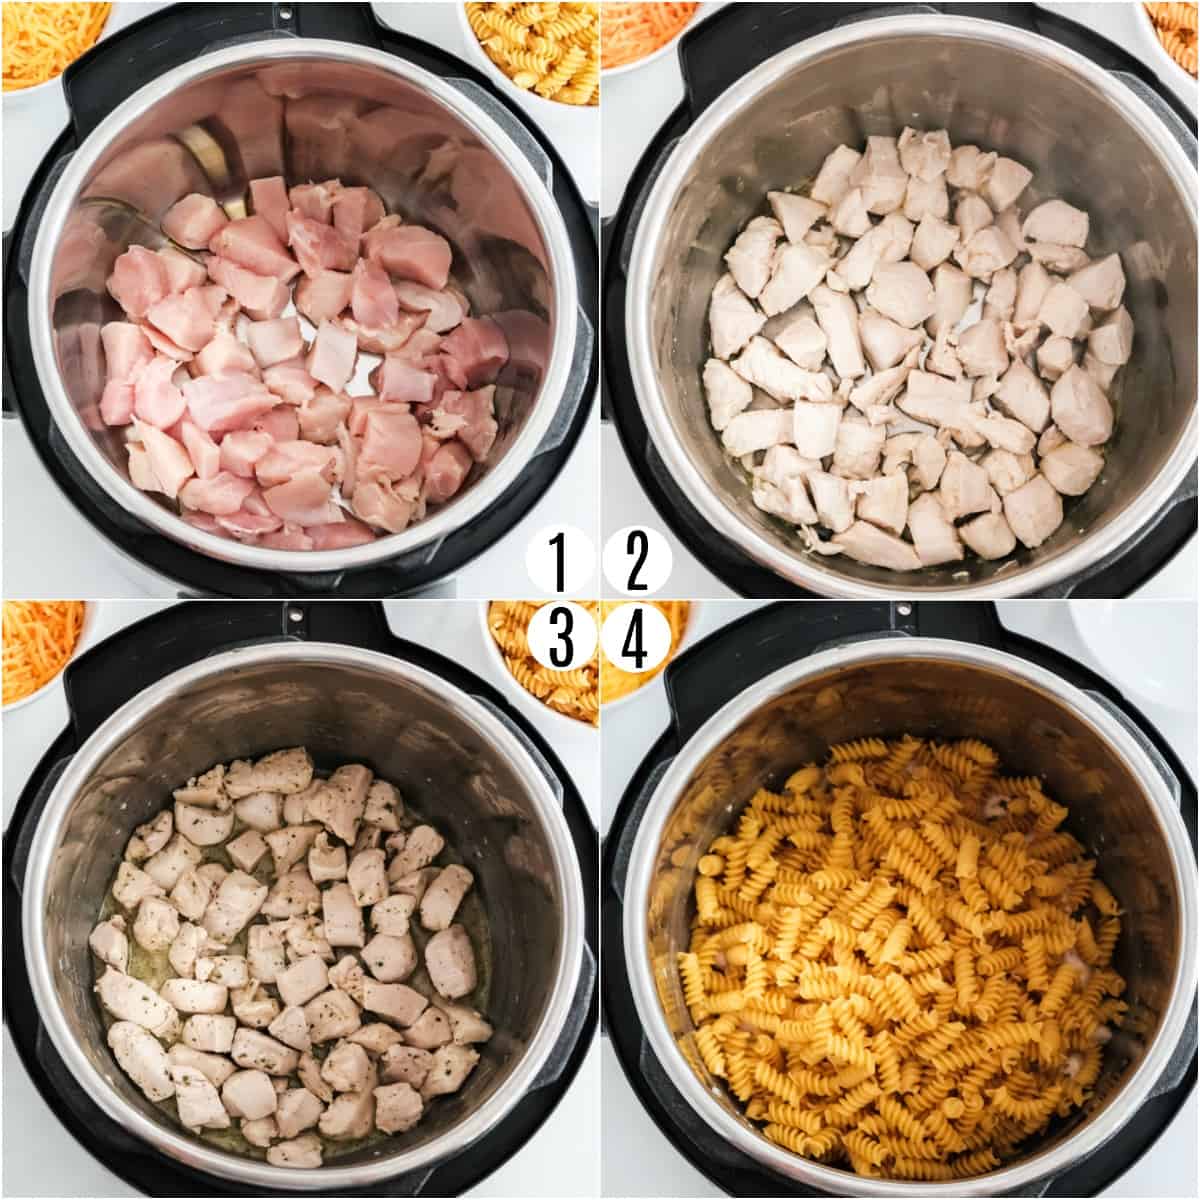 Step by step photos showing how to make crack chicken pasta in pressure cooker.